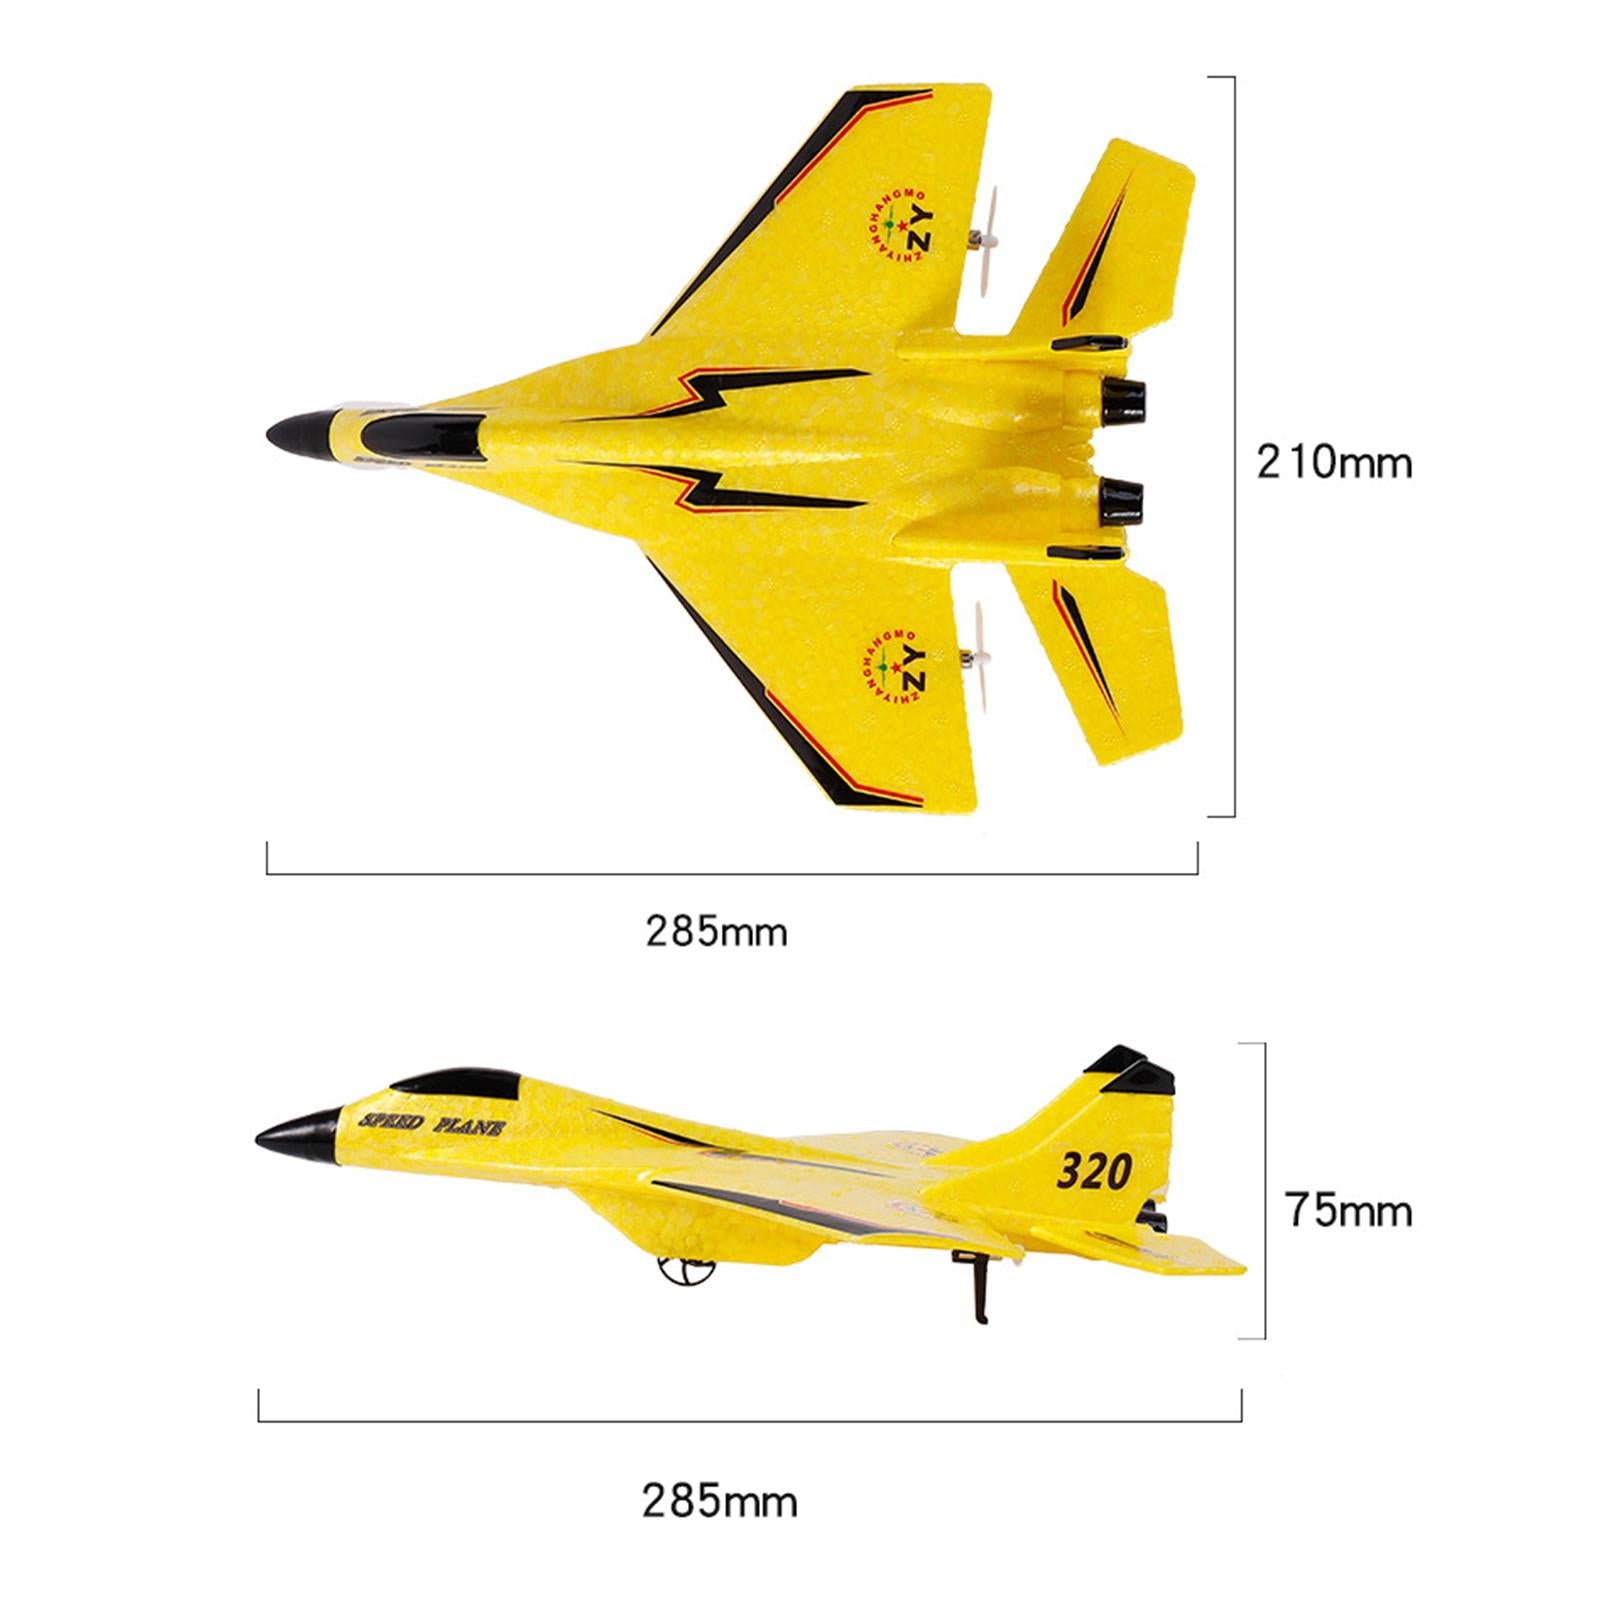 Toy Rc Aircraft Stunt Flying Speed Plane Zy-S30 Pro